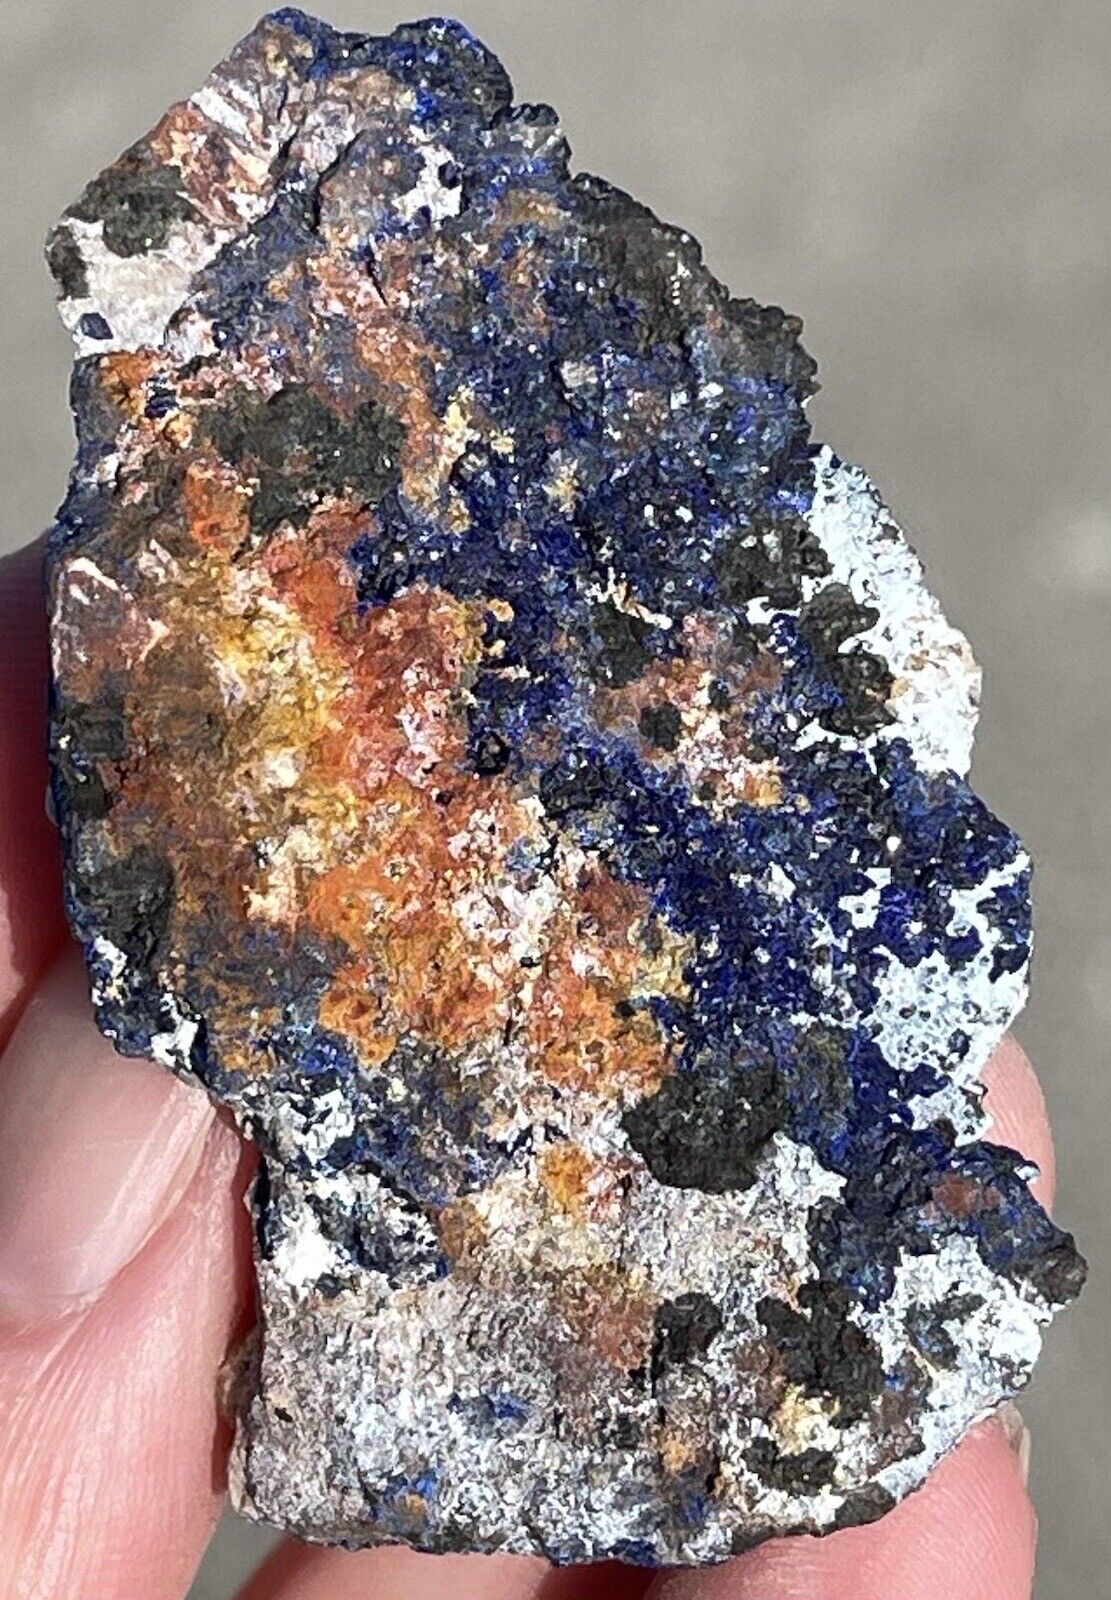 26g Natural Azurite Crystal Mineral Specimen Display Piece Mexico